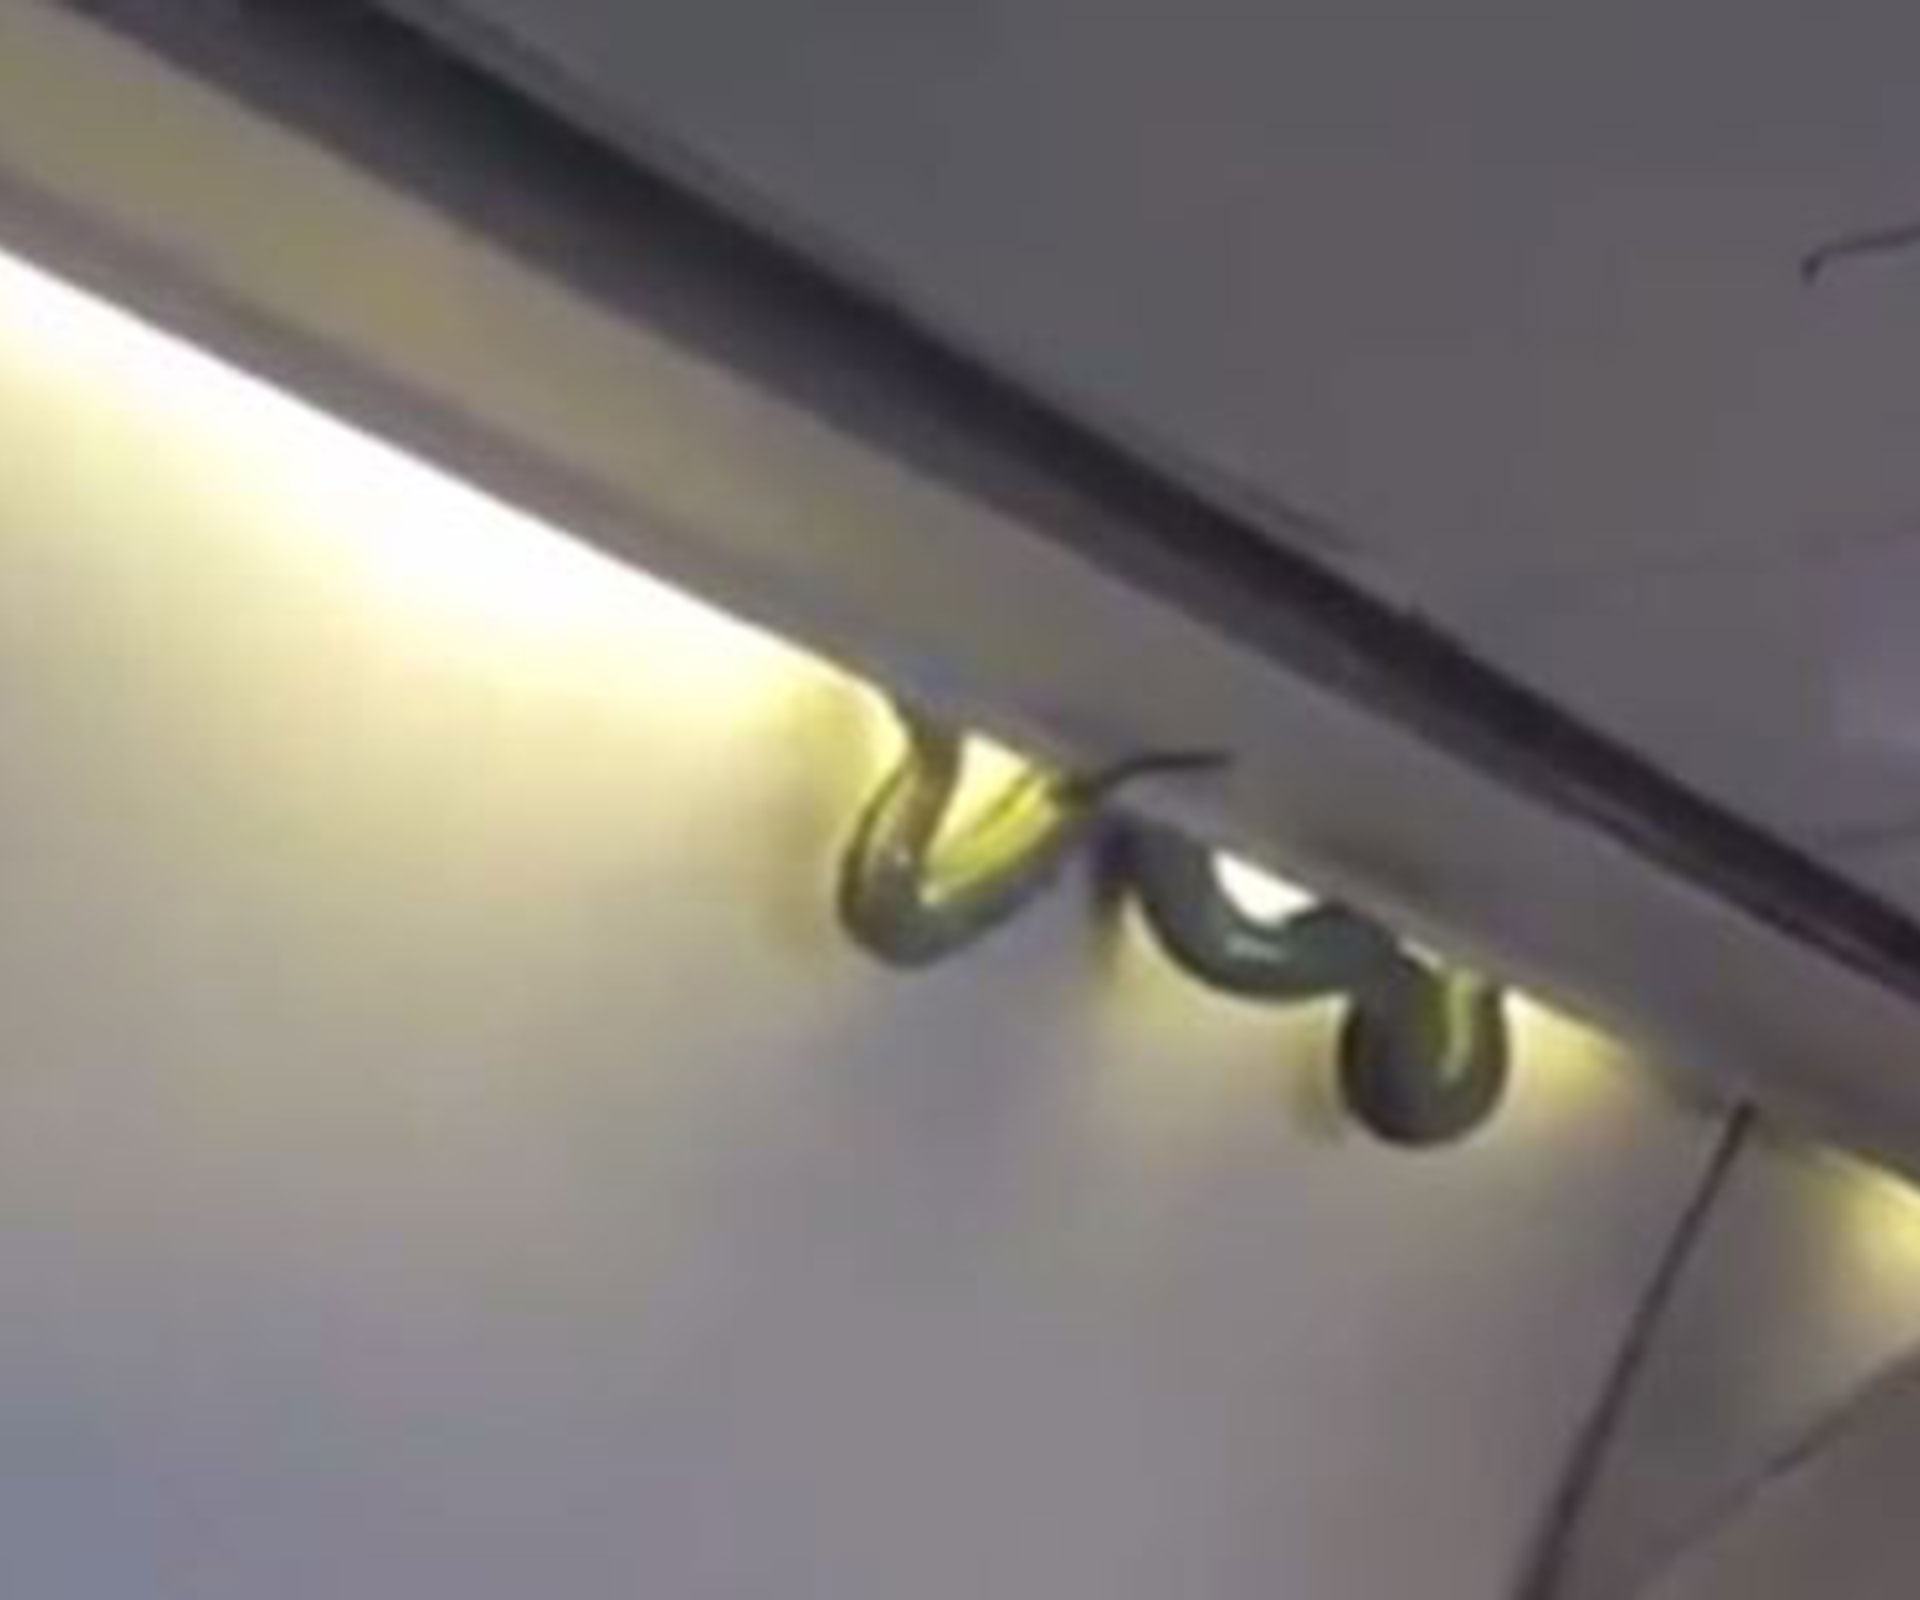 Real-life “snakes on a plane” moment